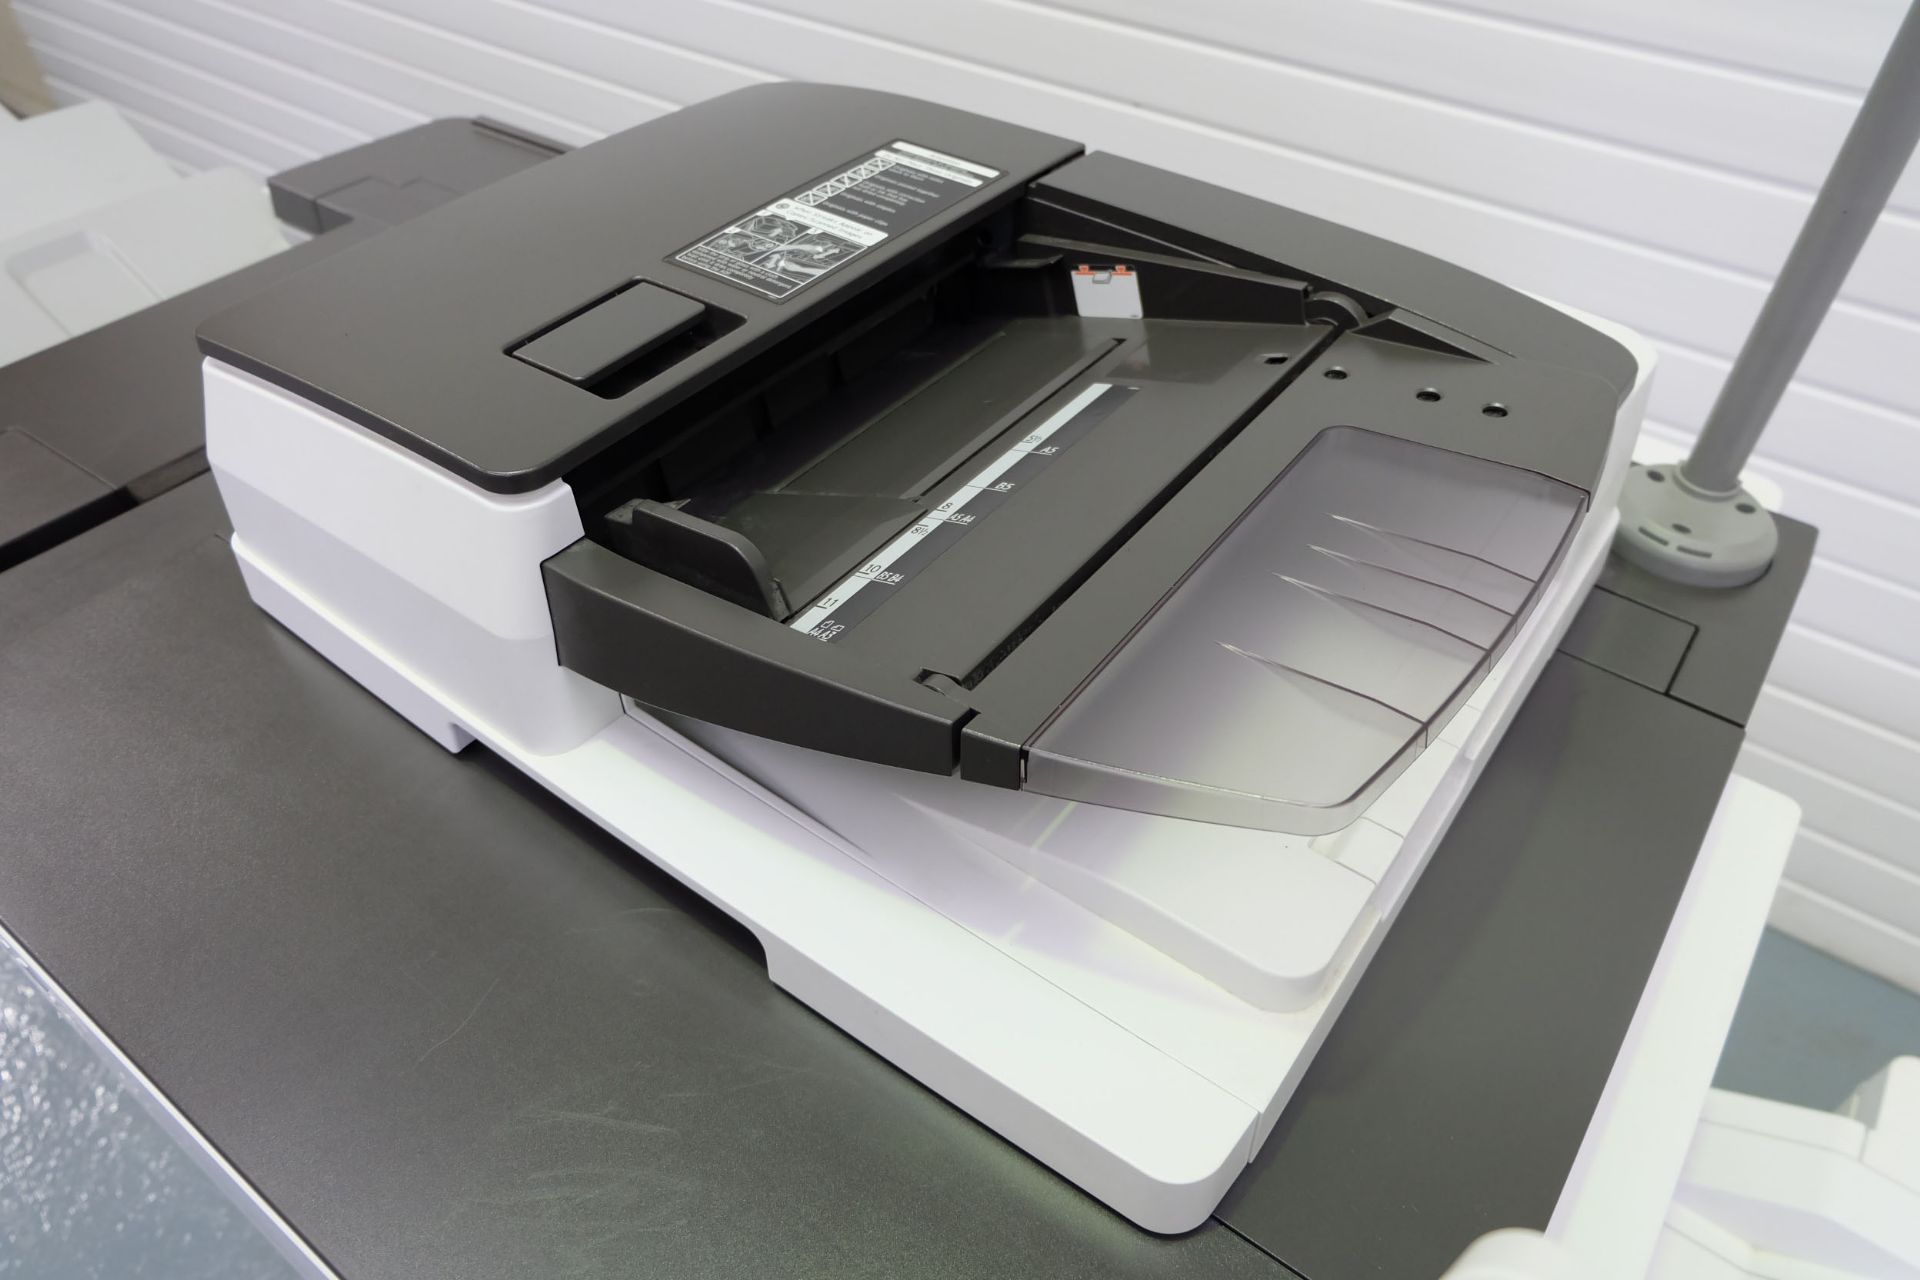 Ricoh Pro C5200s Colour Production Printer. Prints upto 65ppm. Paper Weight Upto 360g/m2. Max Sheet - Image 6 of 23